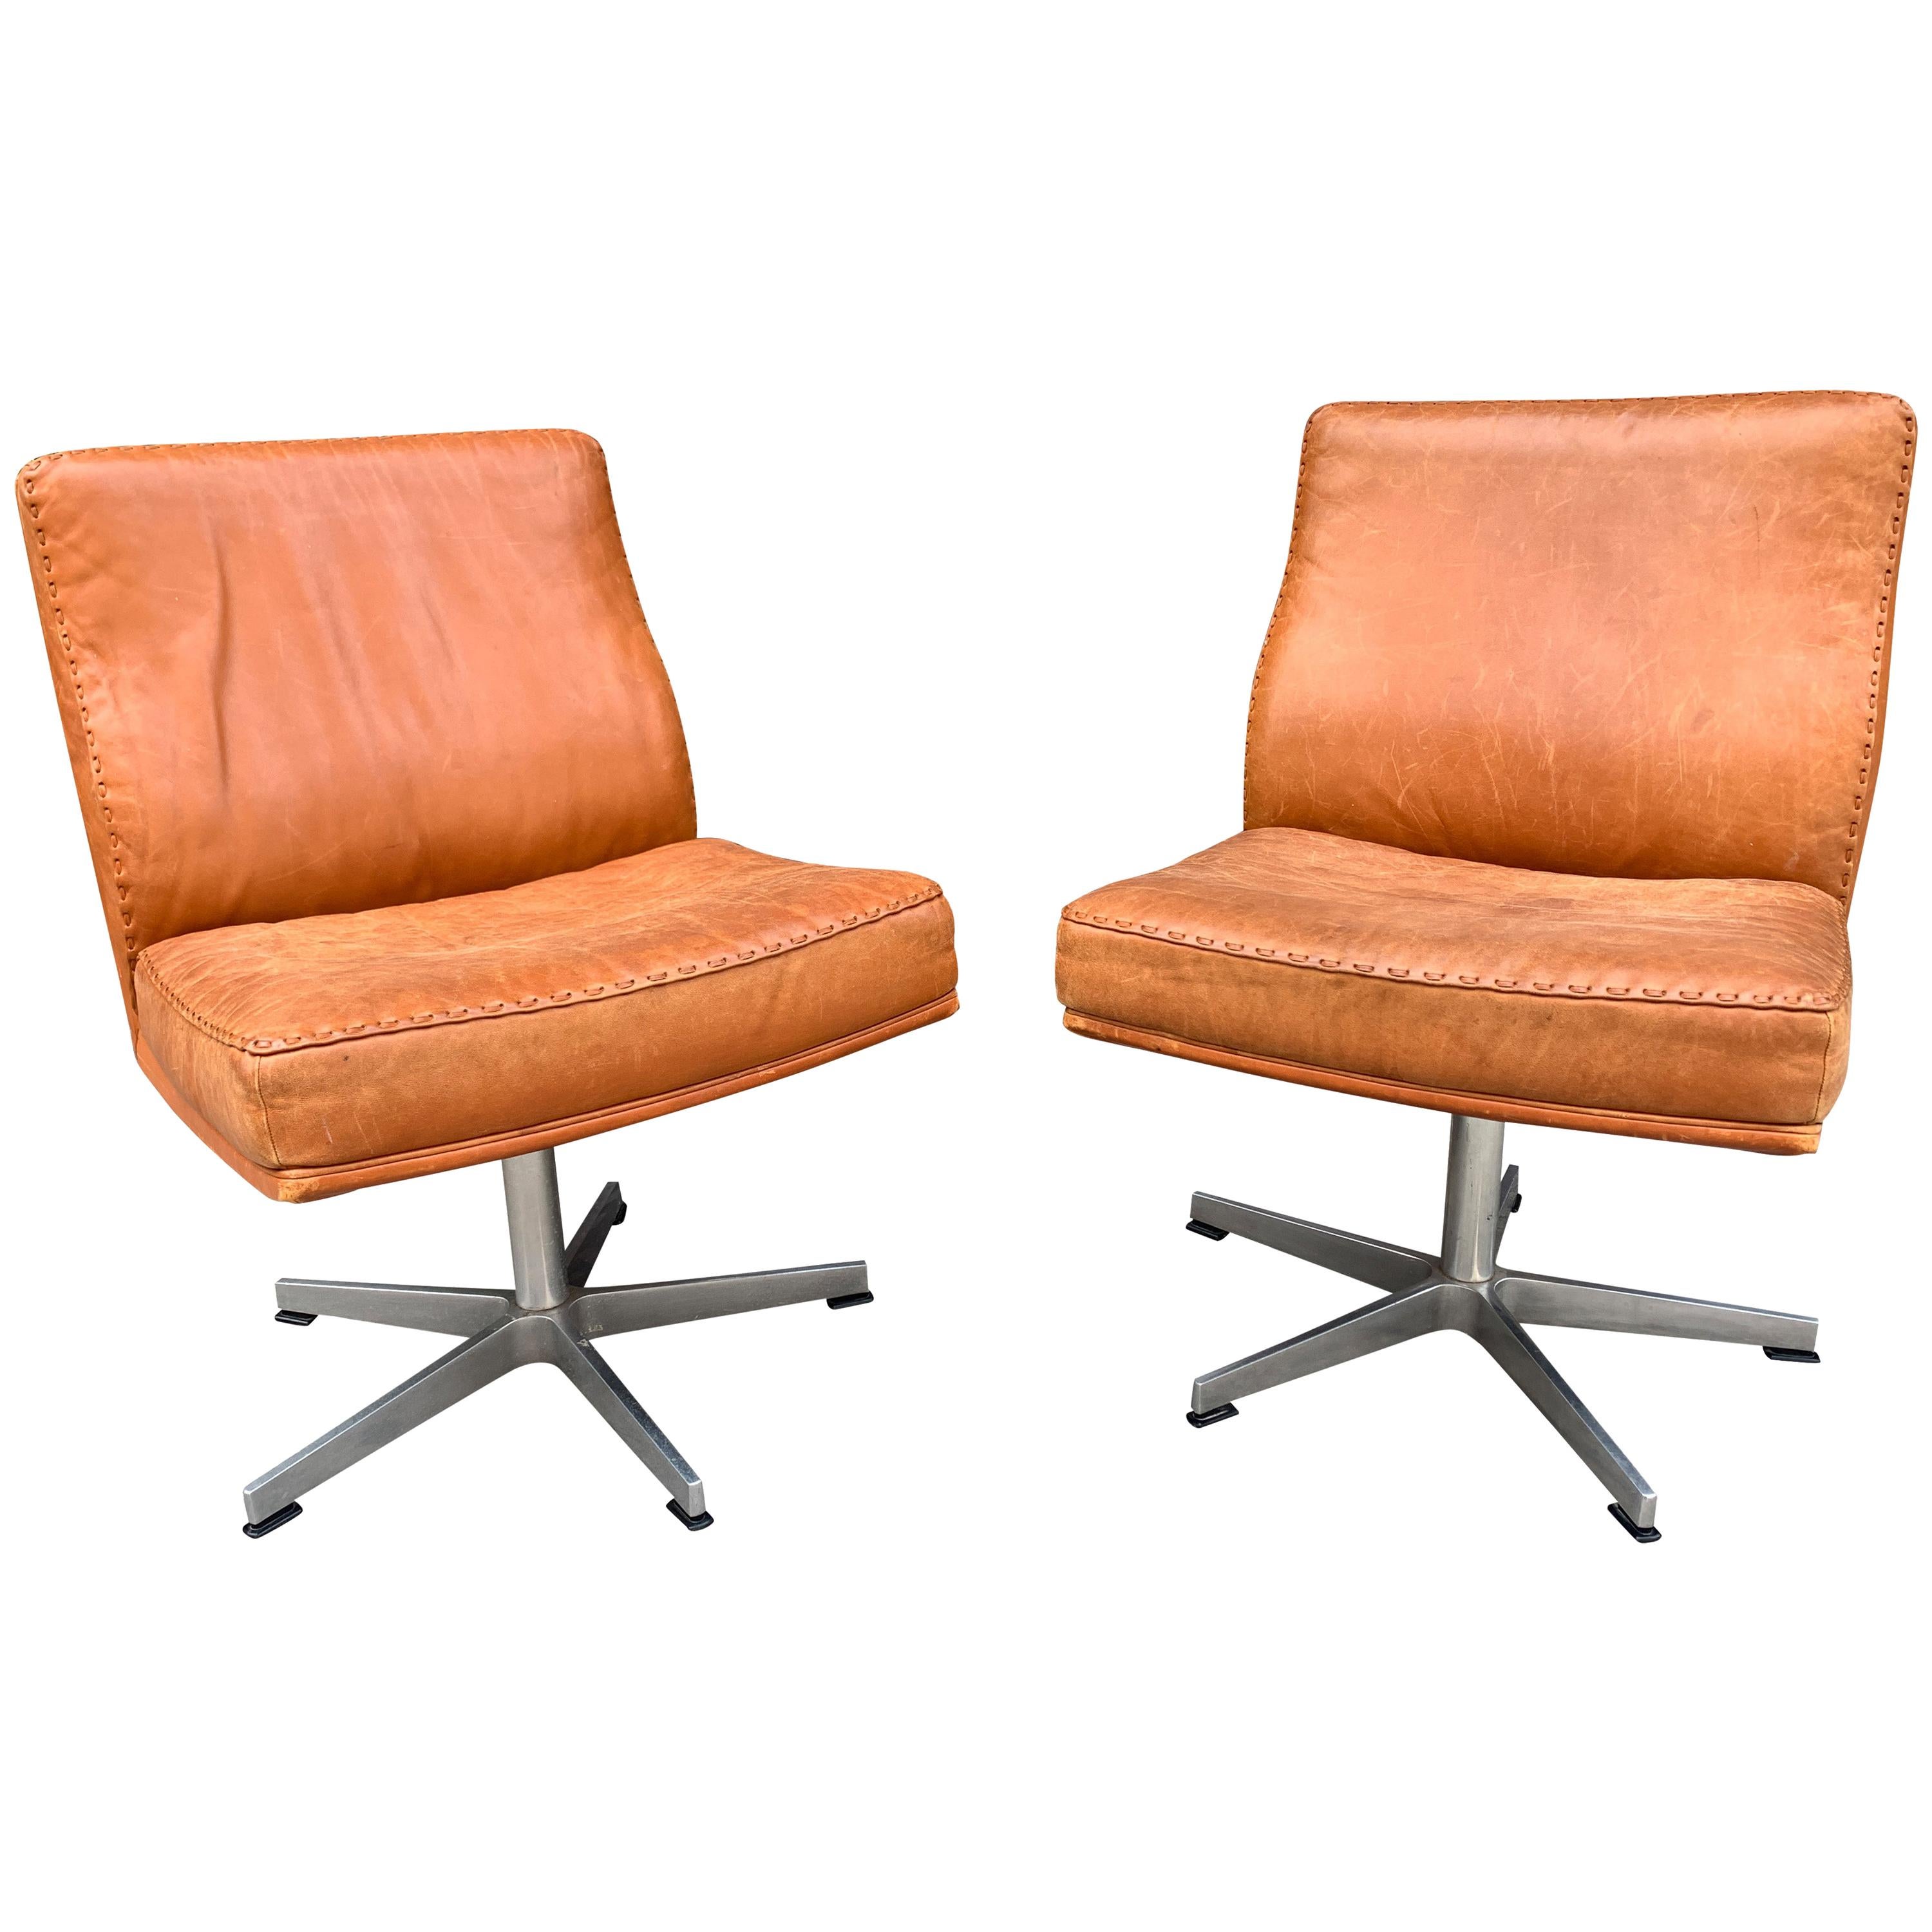 Pair of Vintage Leather Office Chairs